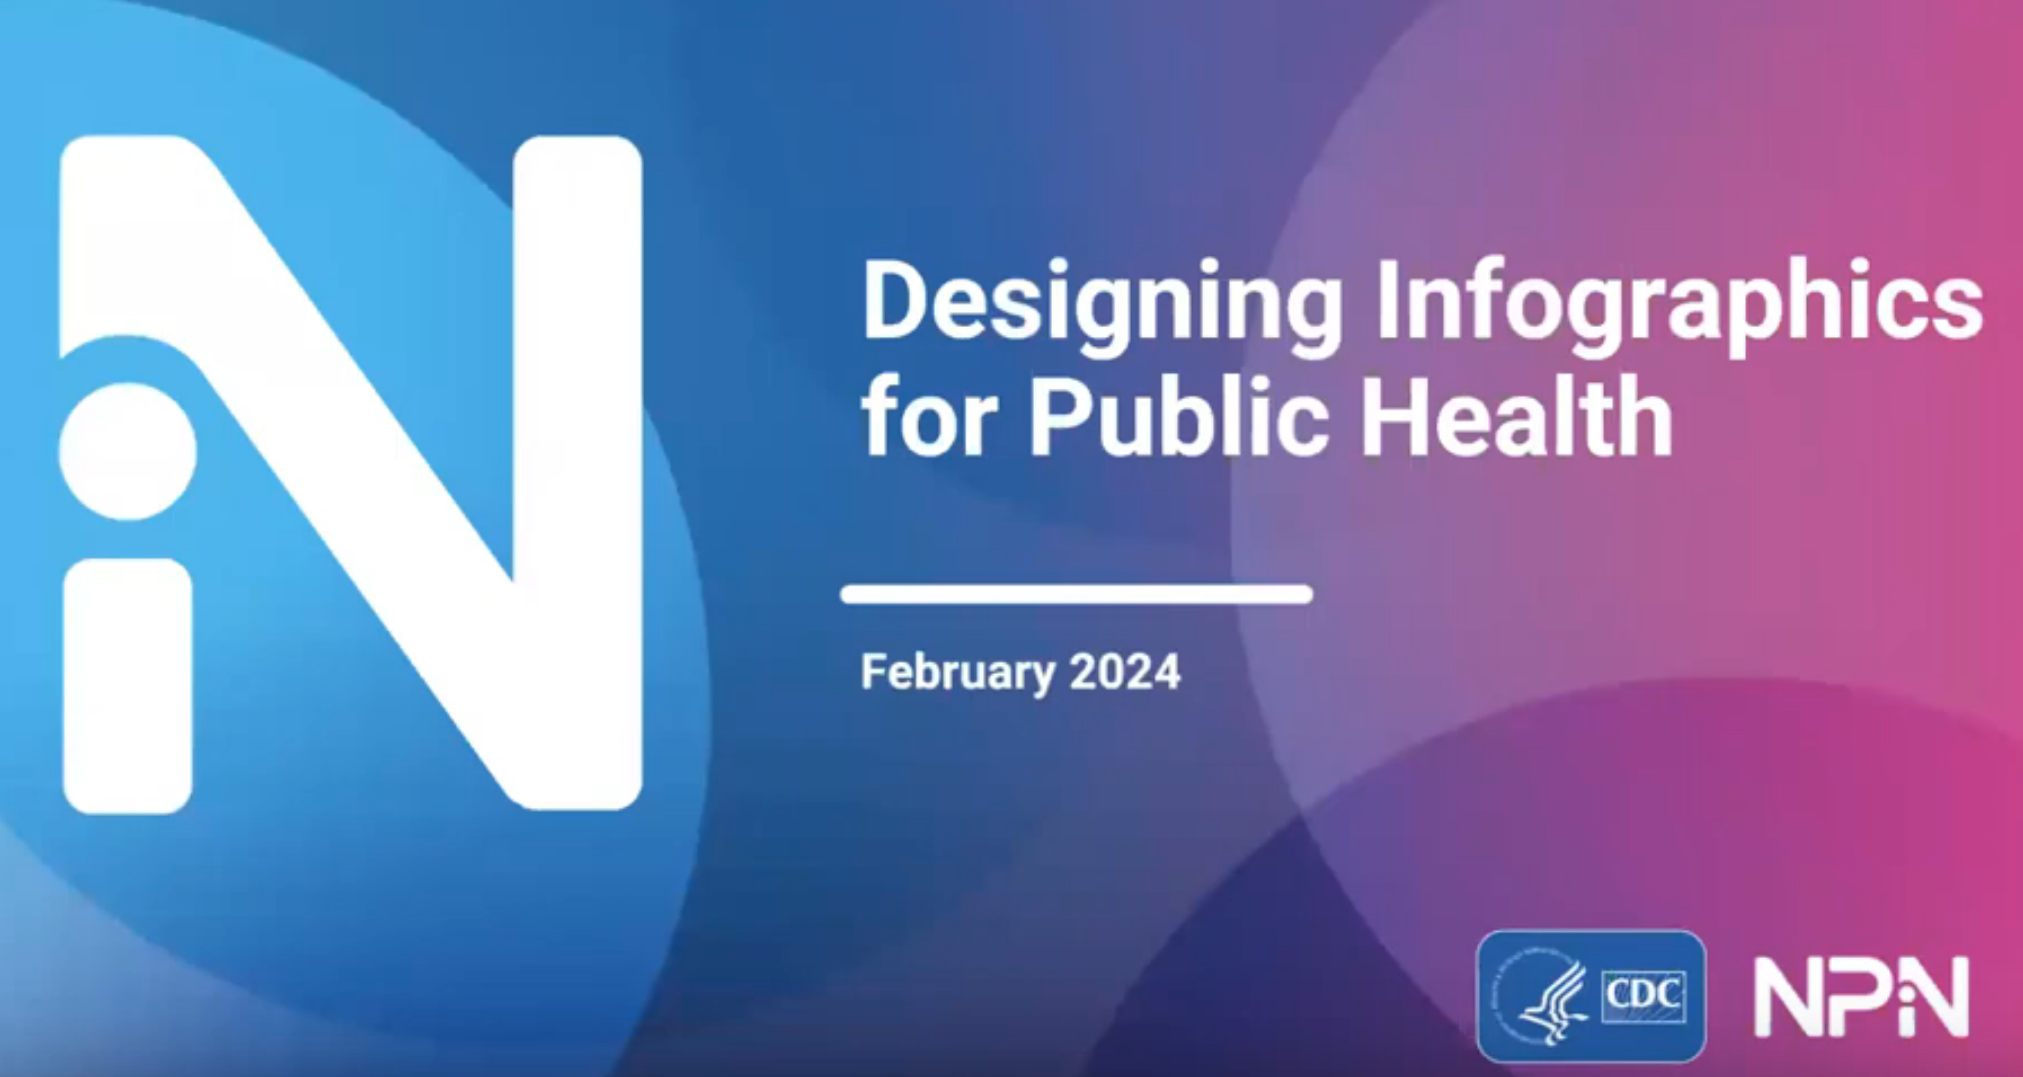 Designing Infographics for Public Health